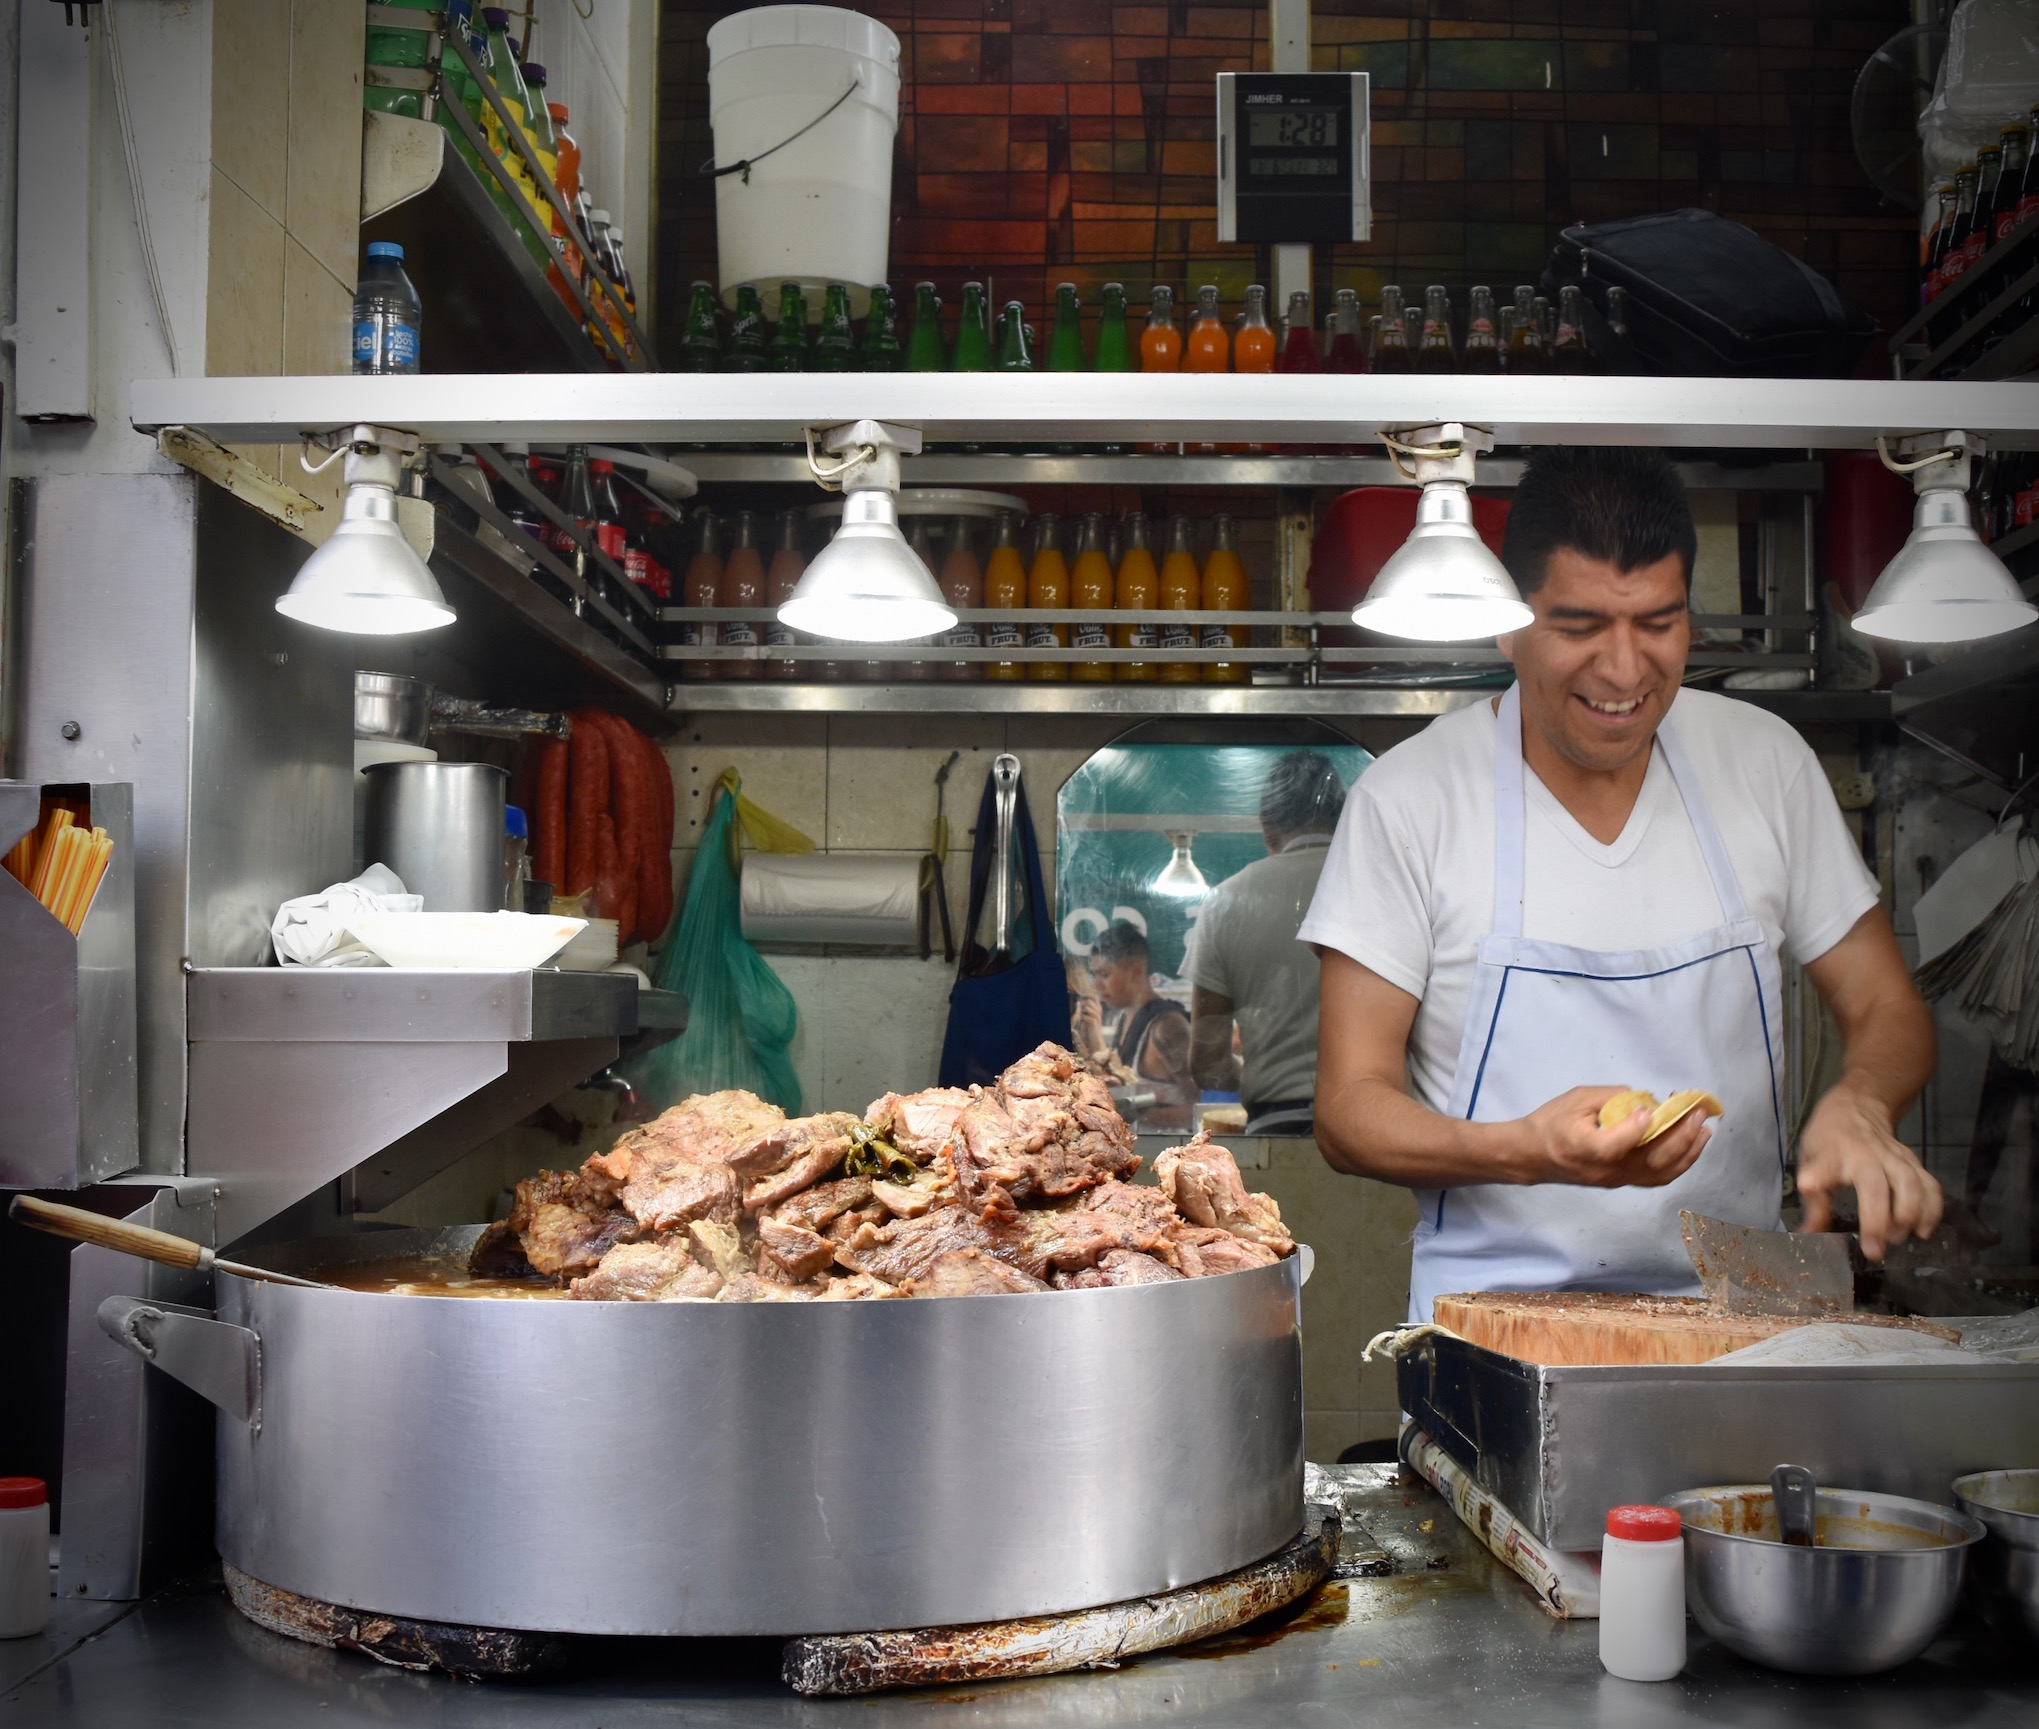 A large pot of meats cooking at Los Cocuyos